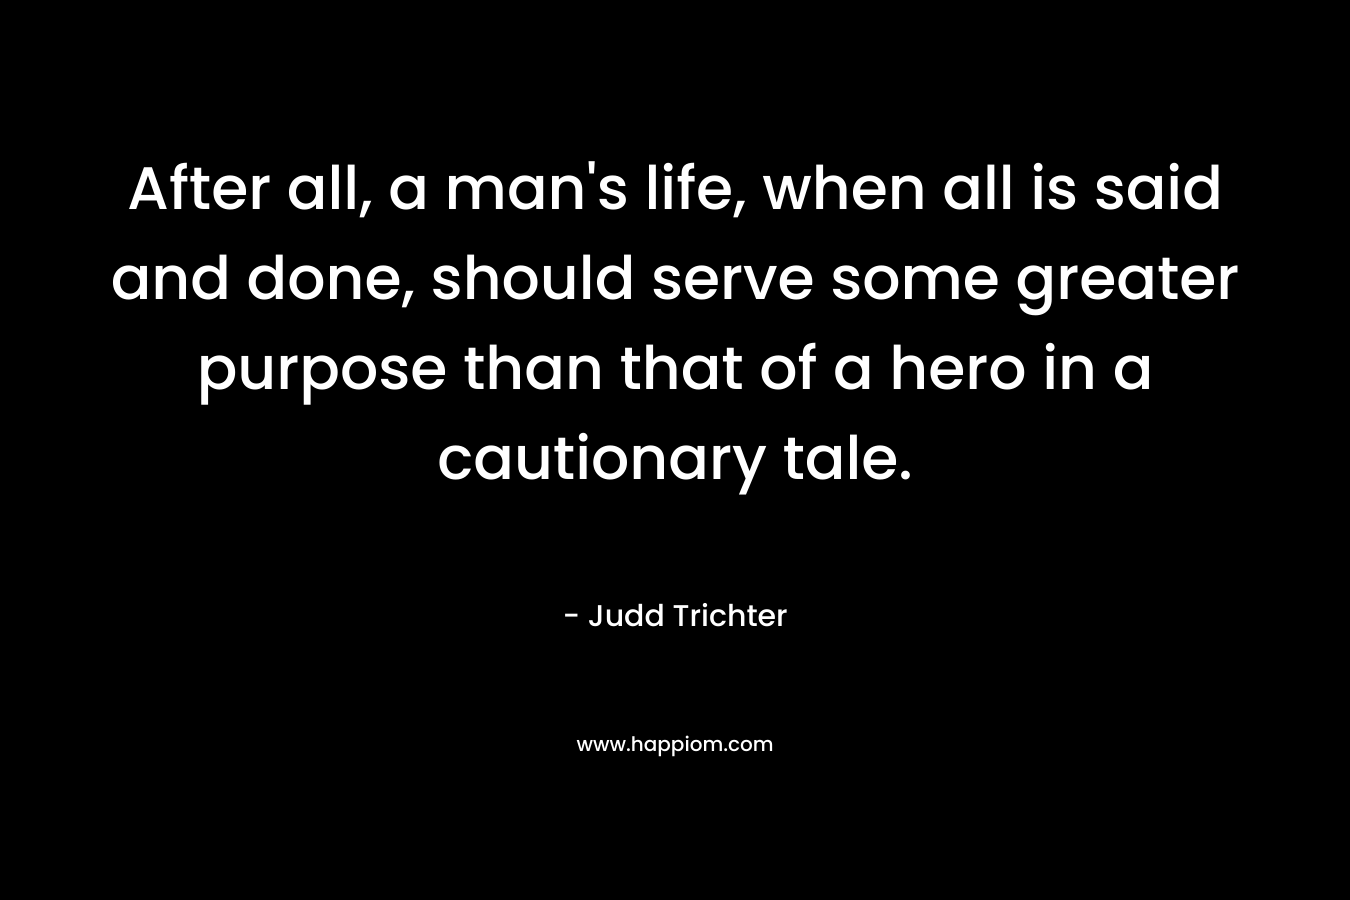 After all, a man’s life, when all is said and done, should serve some greater purpose than that of a hero in a cautionary tale. – Judd Trichter